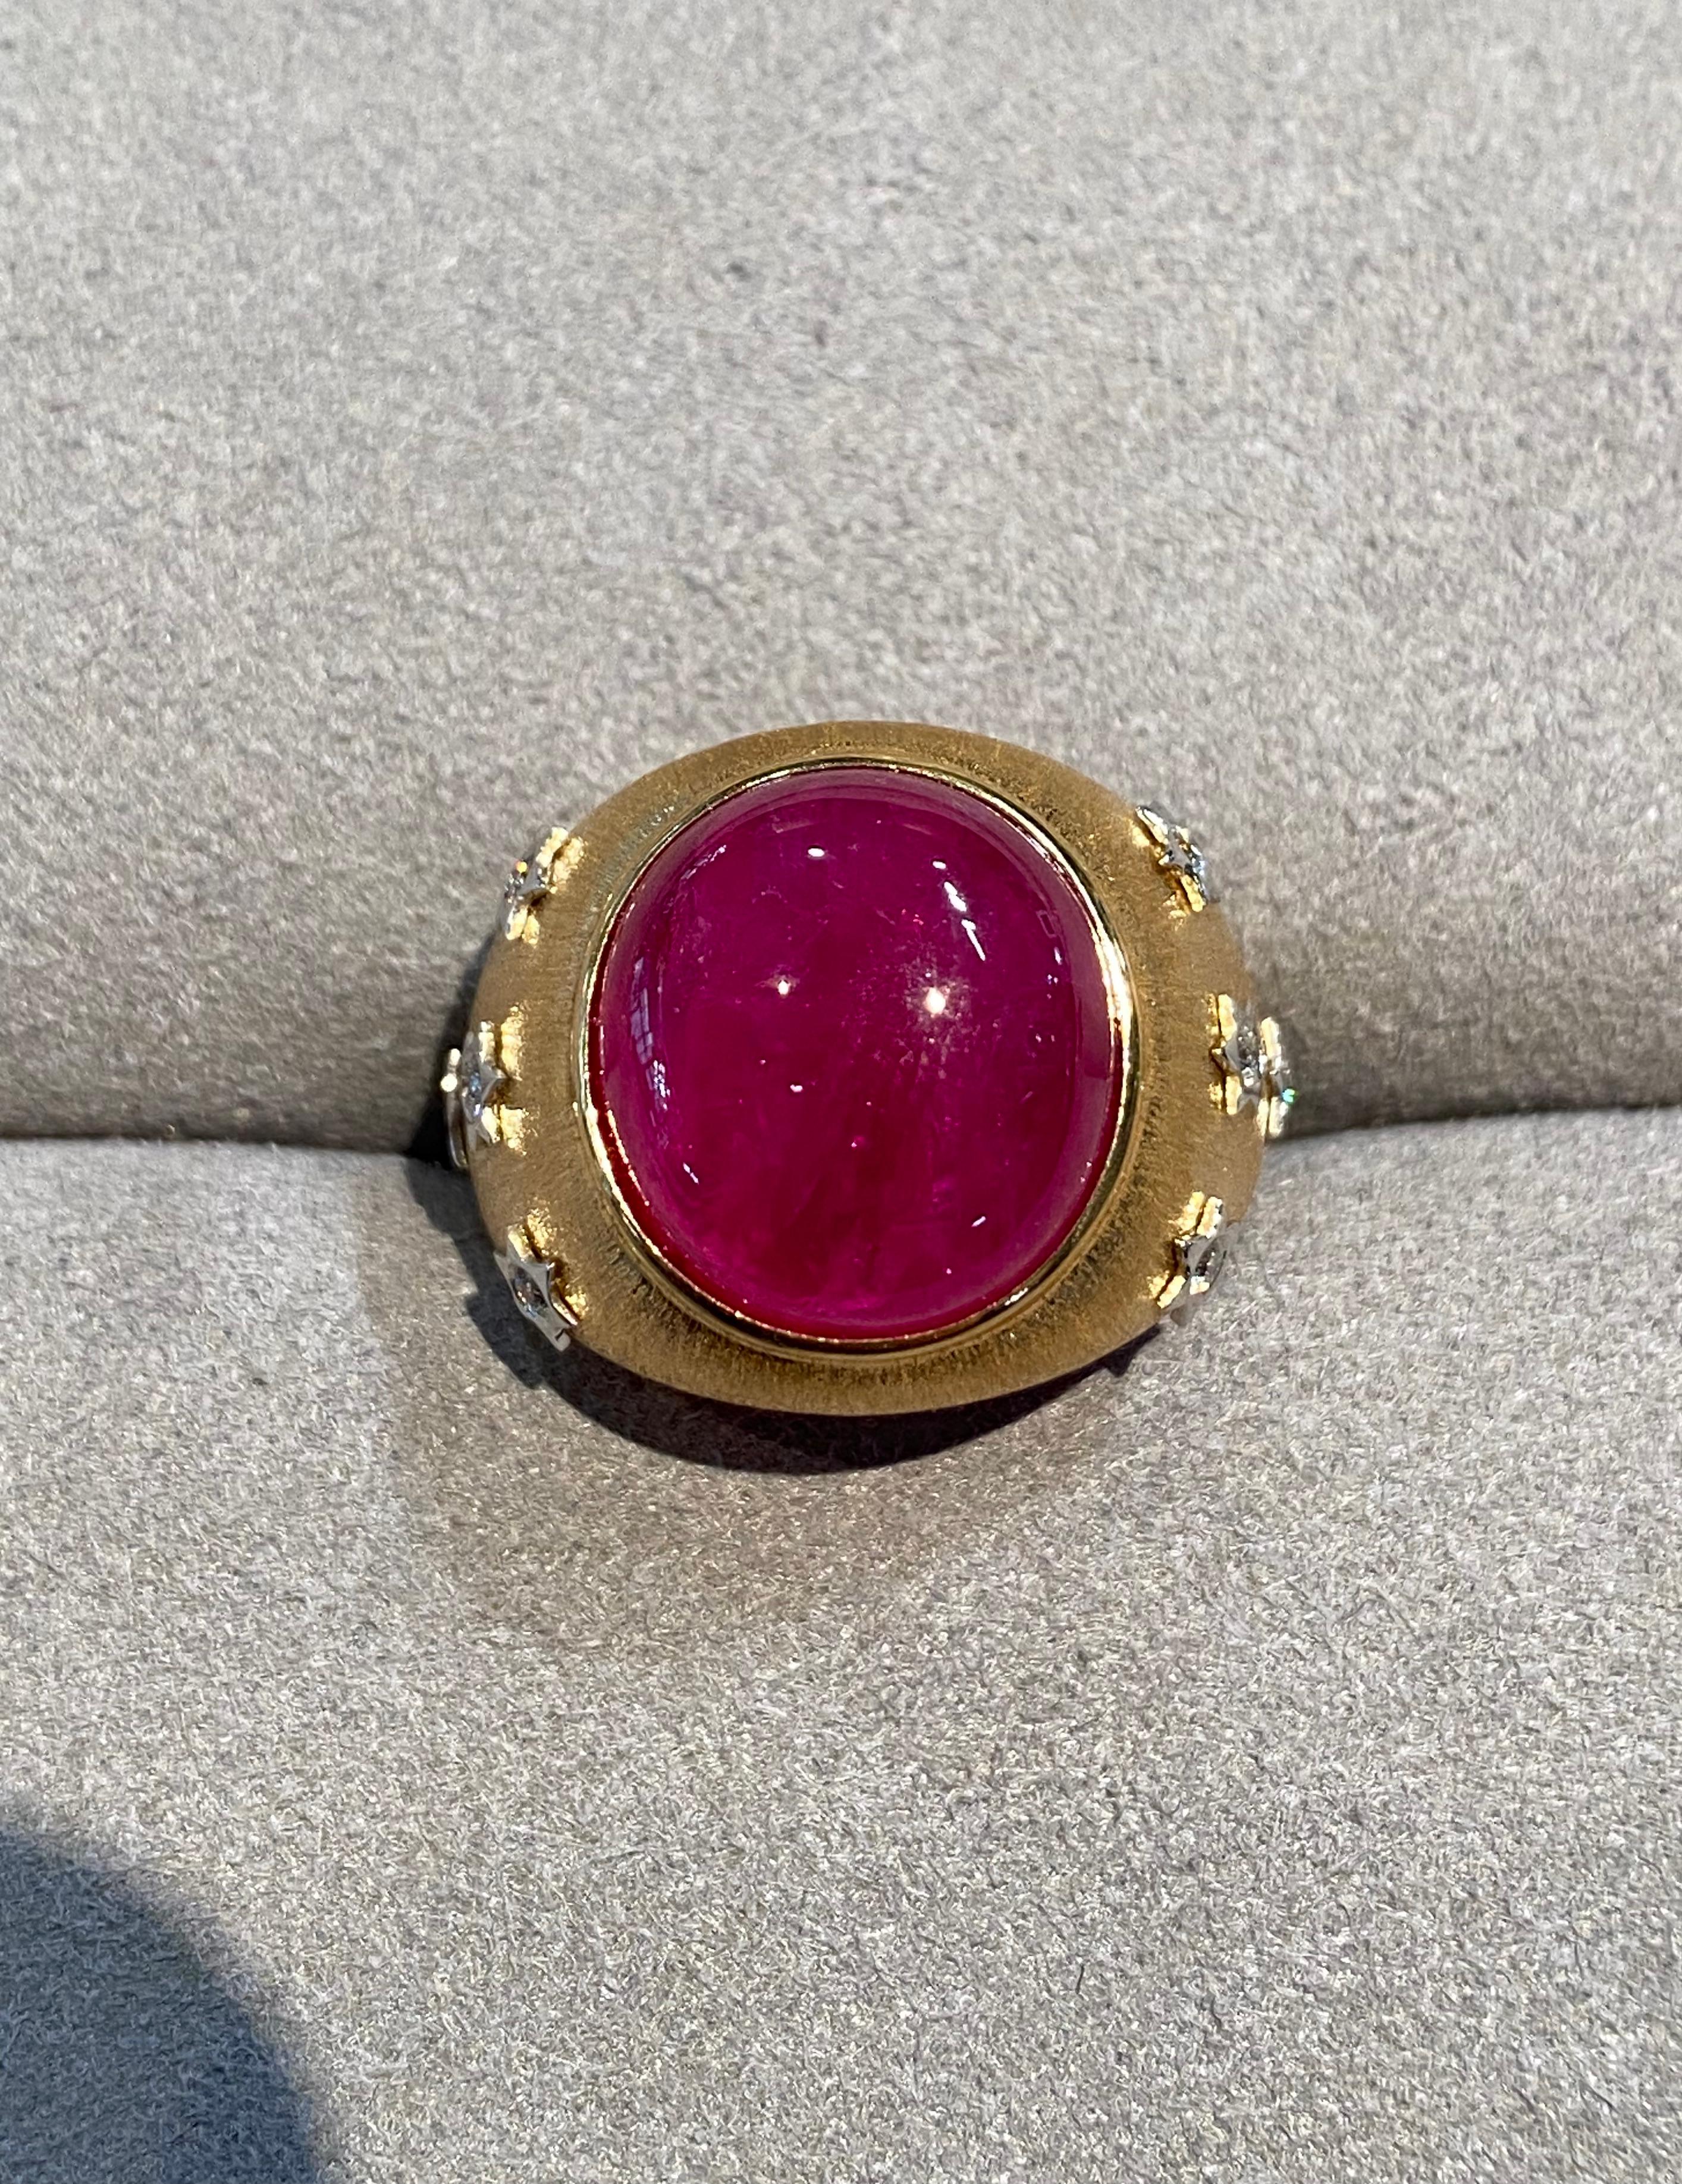 
Type	    :   100% Natural Ruby
Weight	    :   14.820 Carats
Size	    :   14.39 x 13.24 x 7.05 mm
Shape	    :   Oval (Cabochon)
Quantity	    :   1 pcs
Color	    :   Vivid Red
Clarity	    :   VSS
Luster	    :   Excellent
Hardness	    :   9
Origin	   